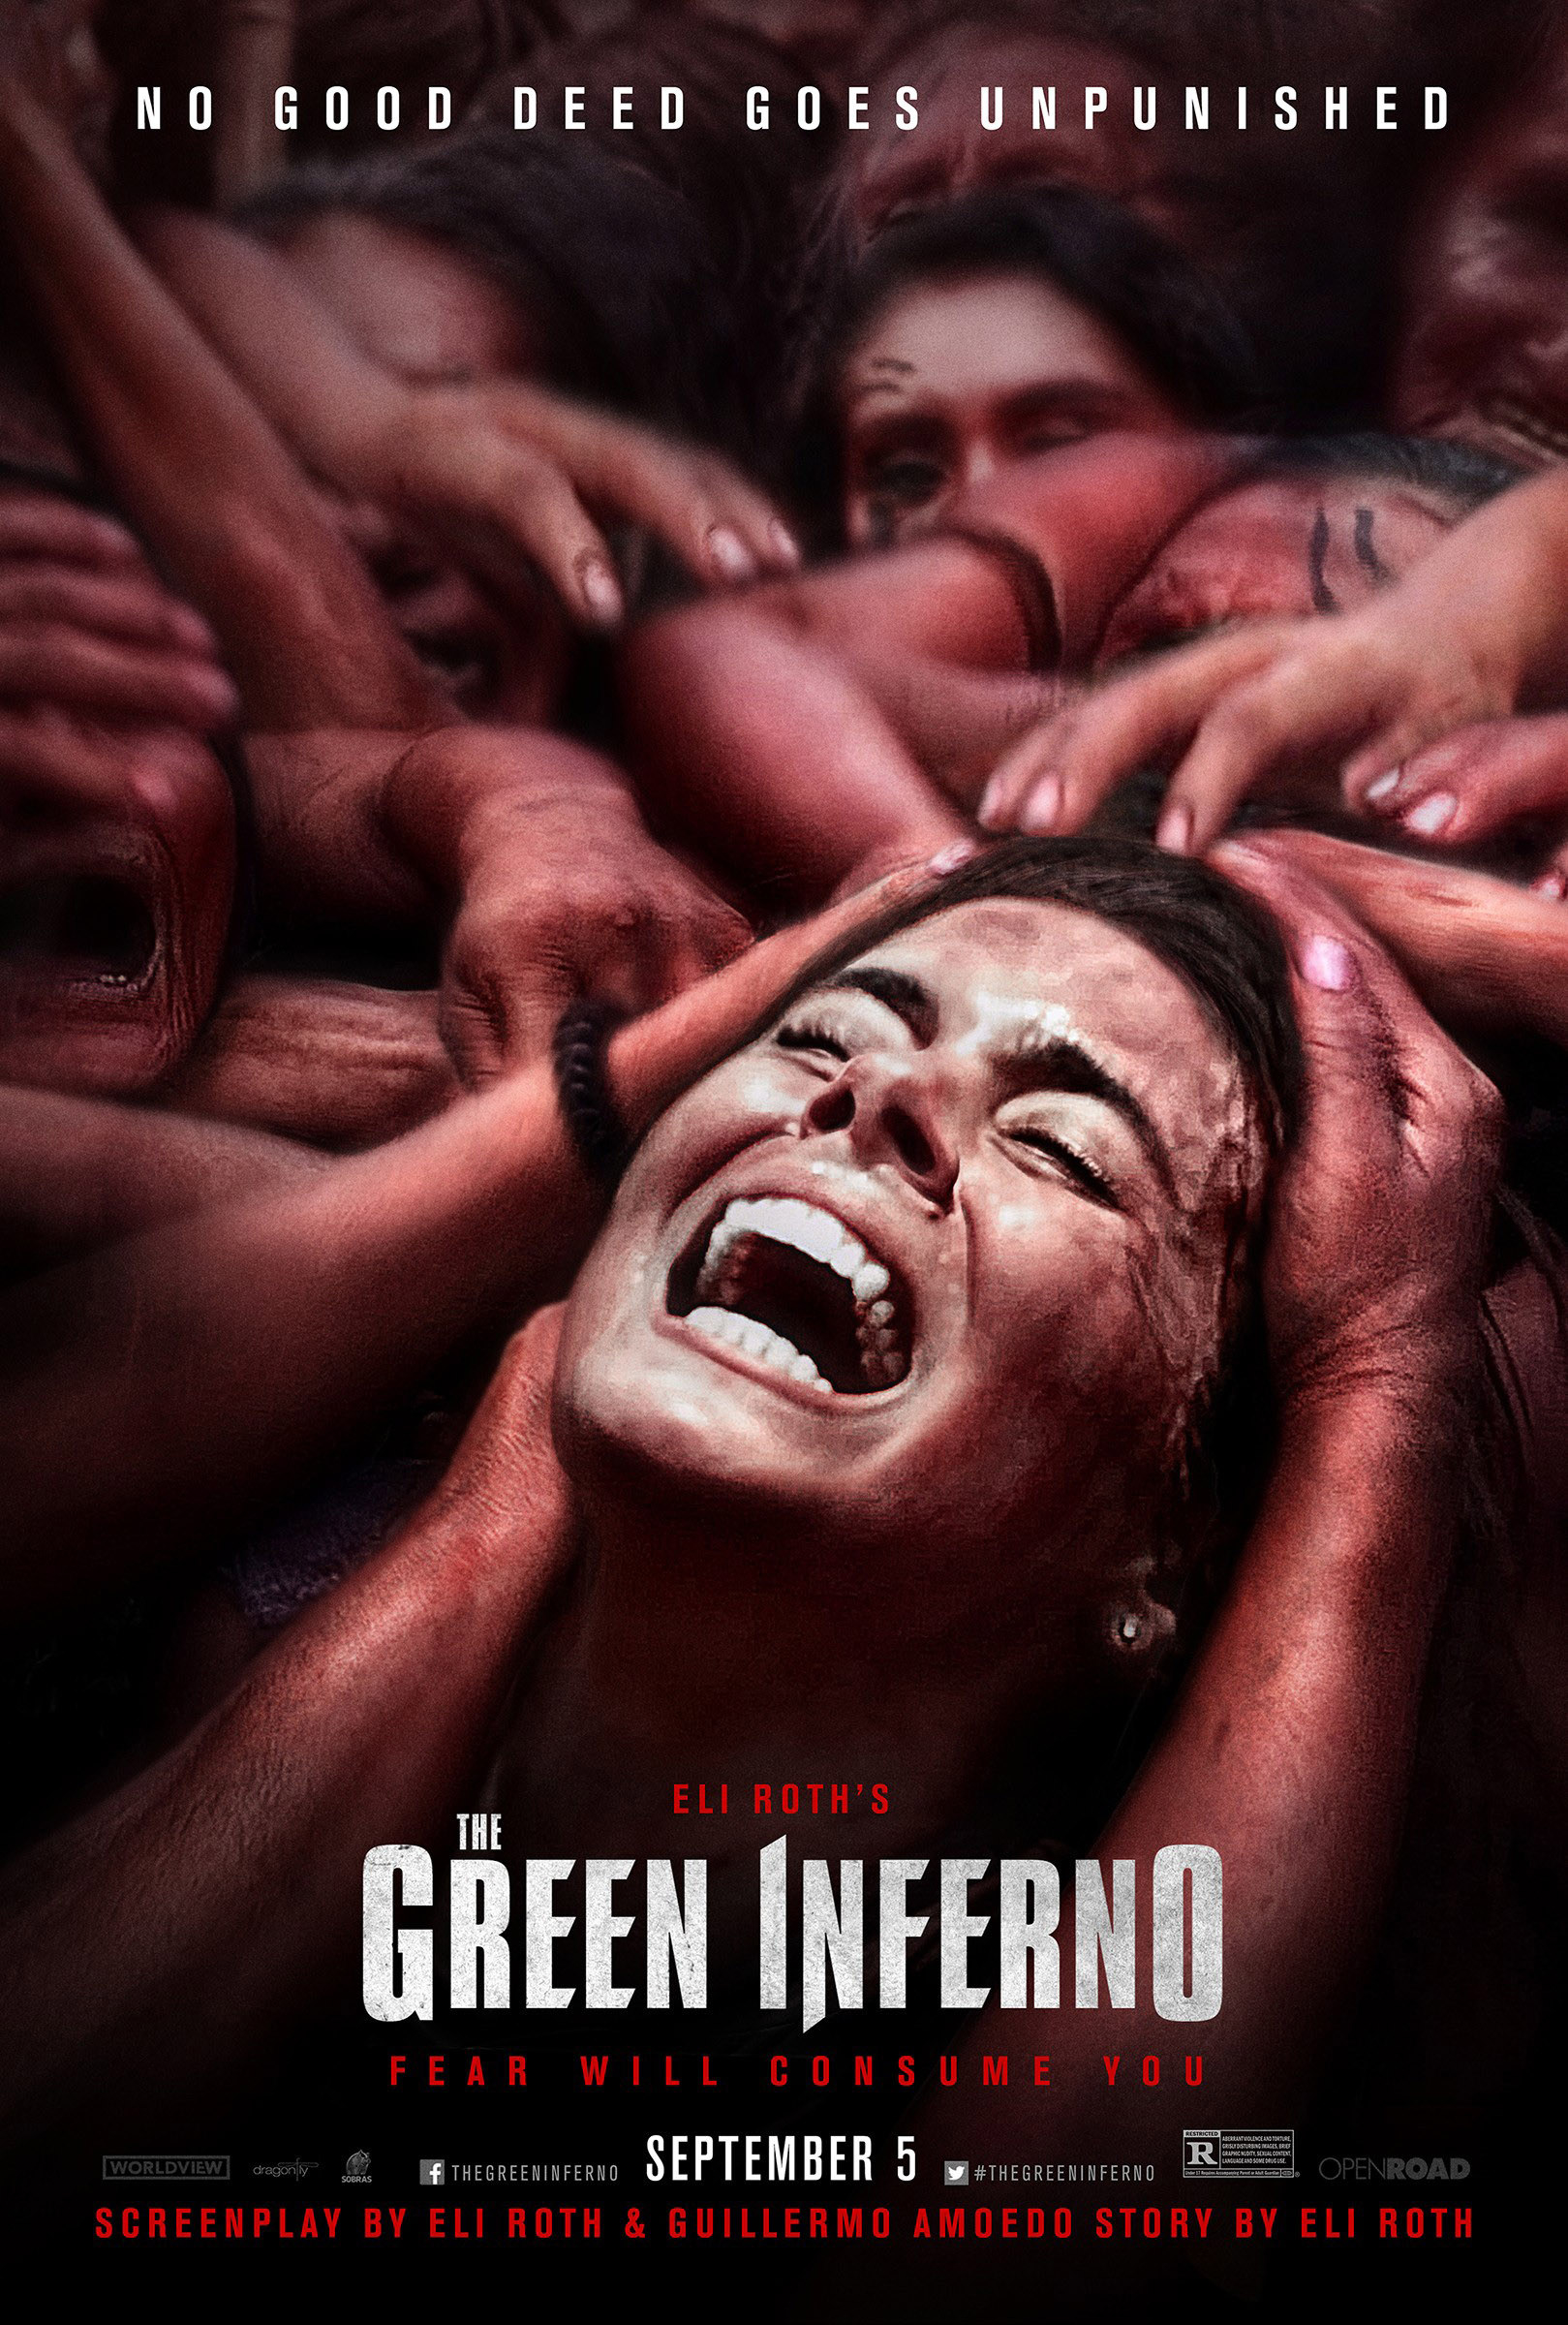 The poster for &quot;The Green Inferno&quot;